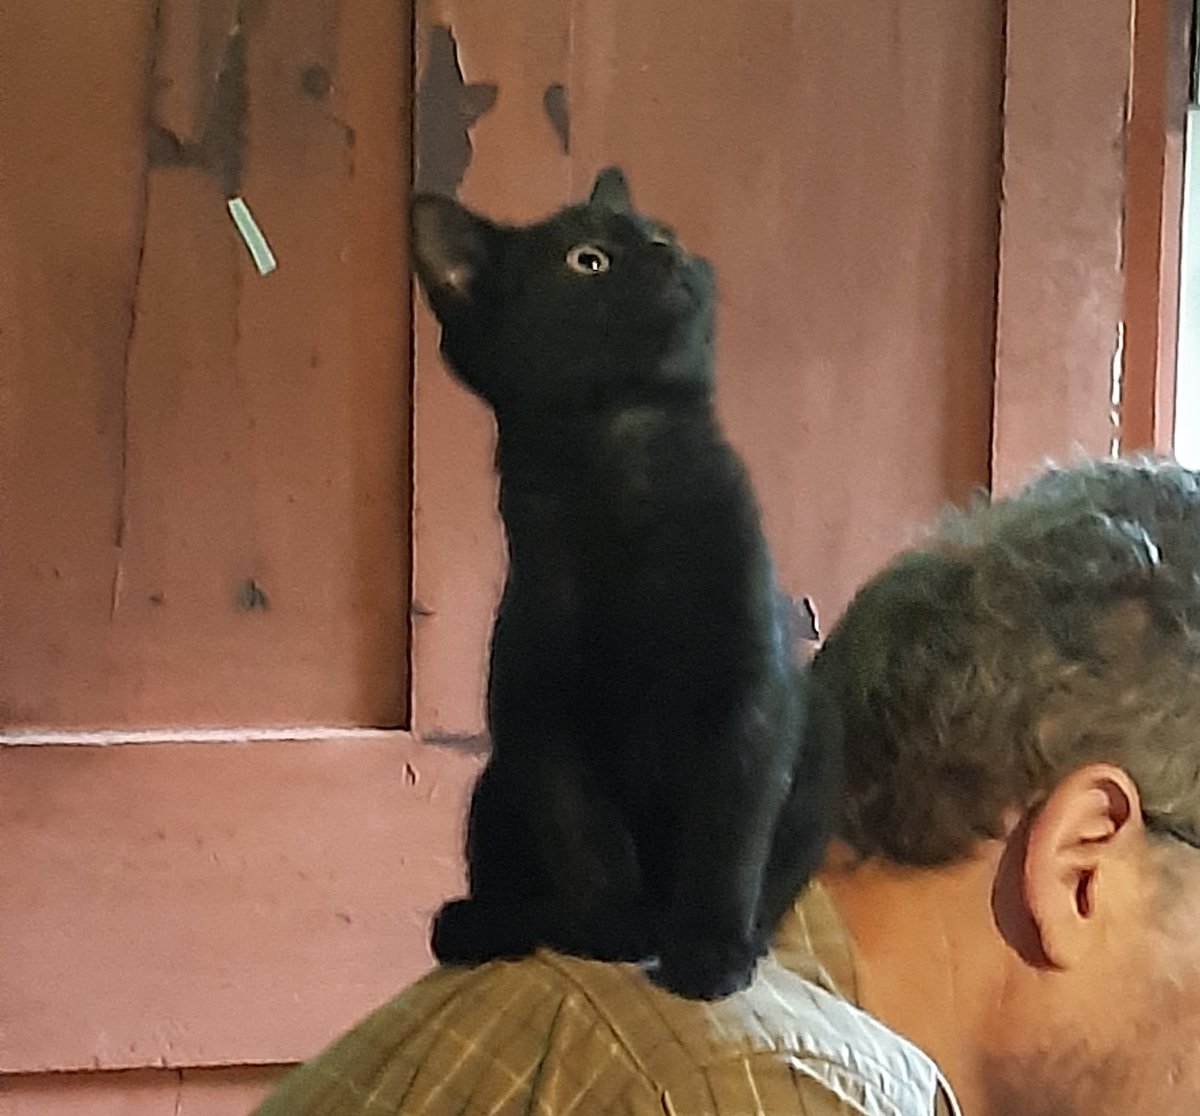 @scratchfinearts Cute! Here is Ozzy in his youth doing a shoulder perch.